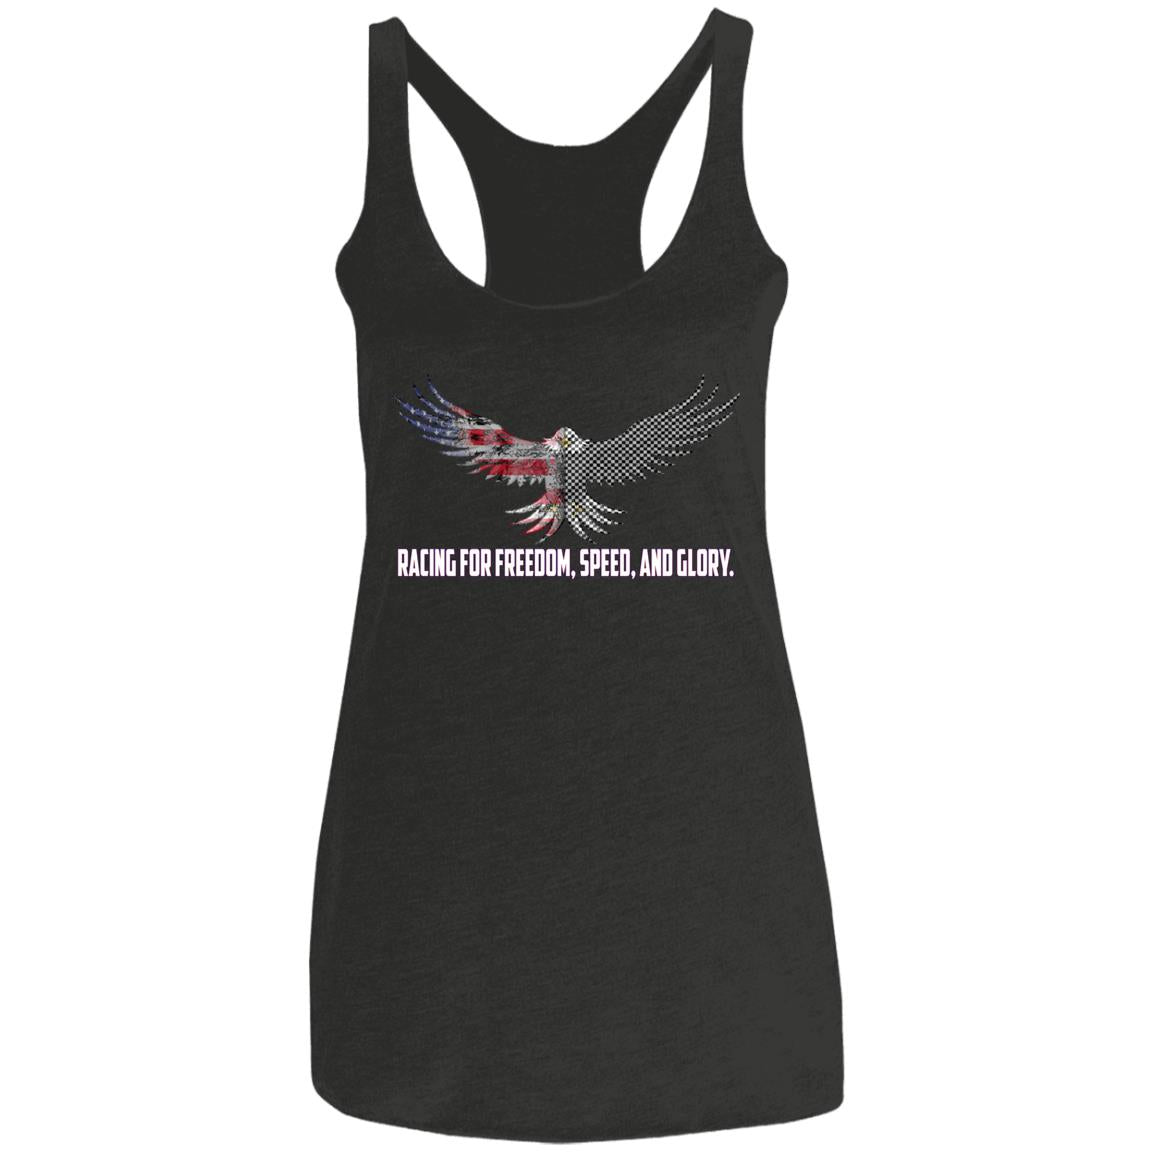 Racing For Freedom, Speed, And Glory Ladies' Triblend Racerback Tank